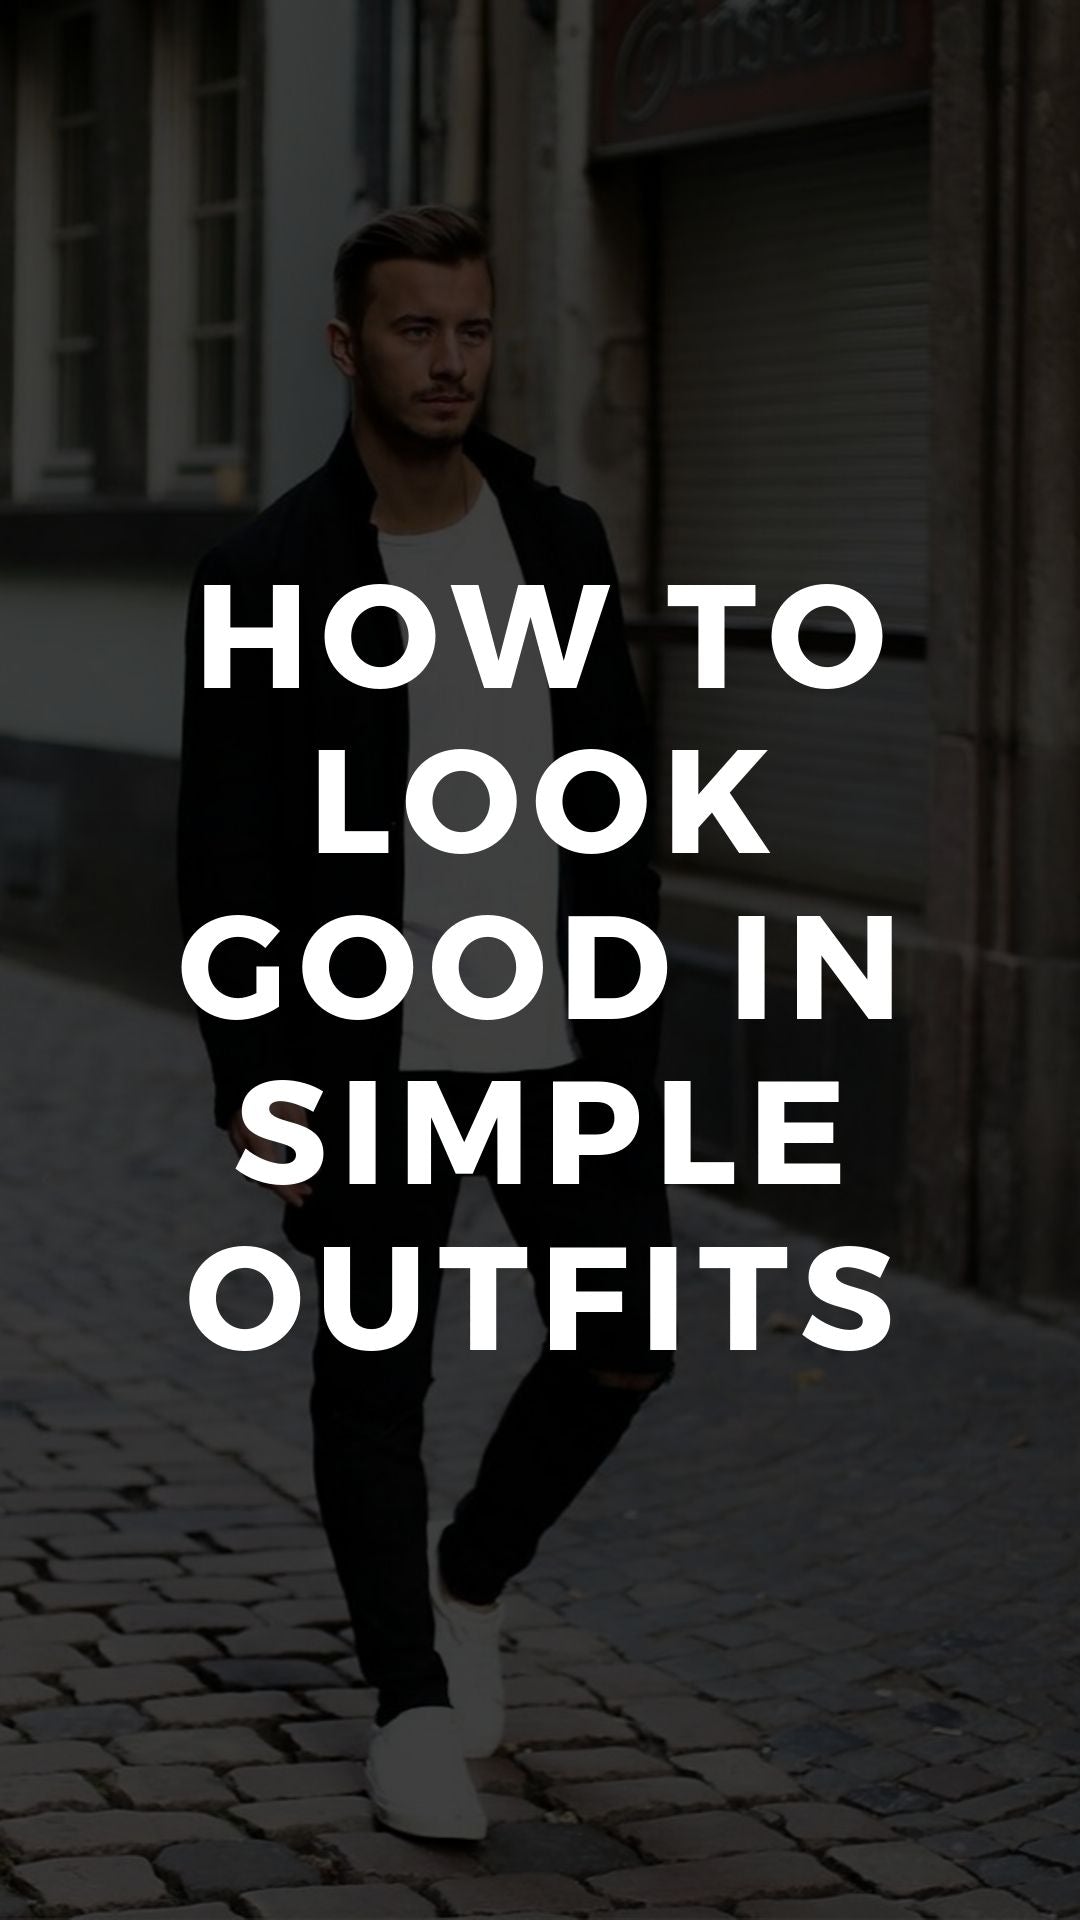 Simple outfits for men #mensfashion #simple #outfits 